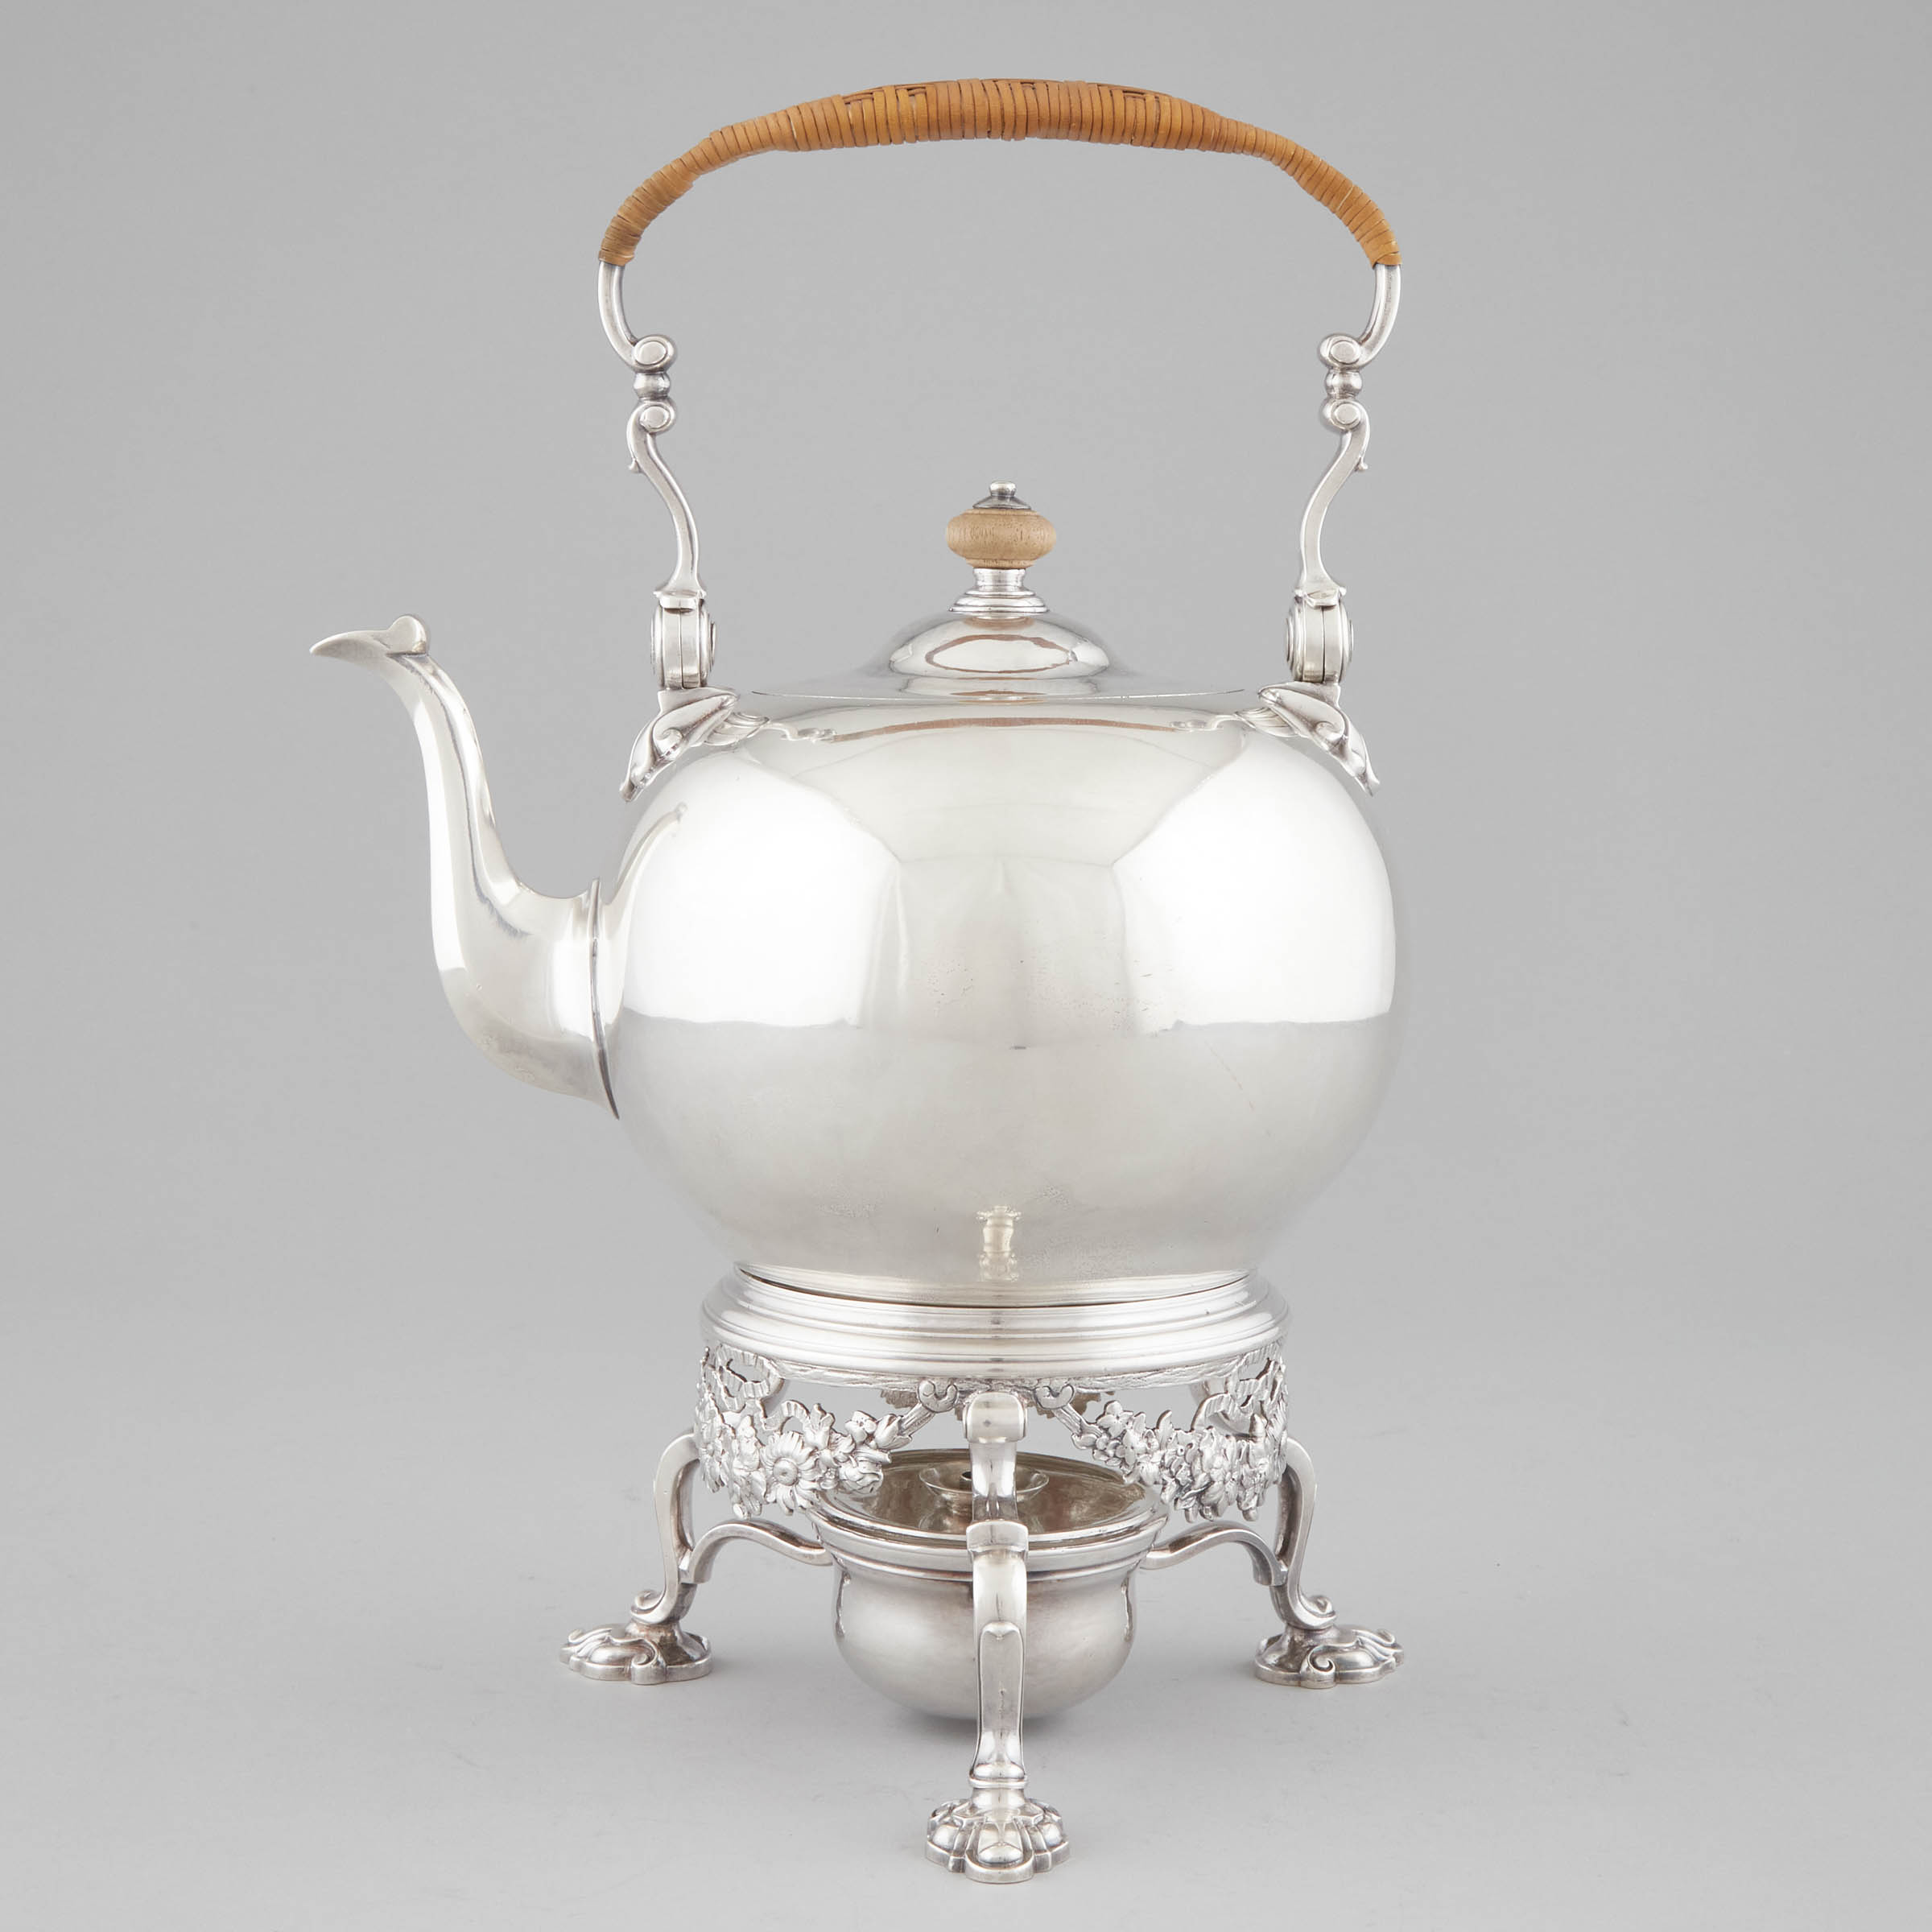 George II Silver Kettle on Lampstand  2fb0911